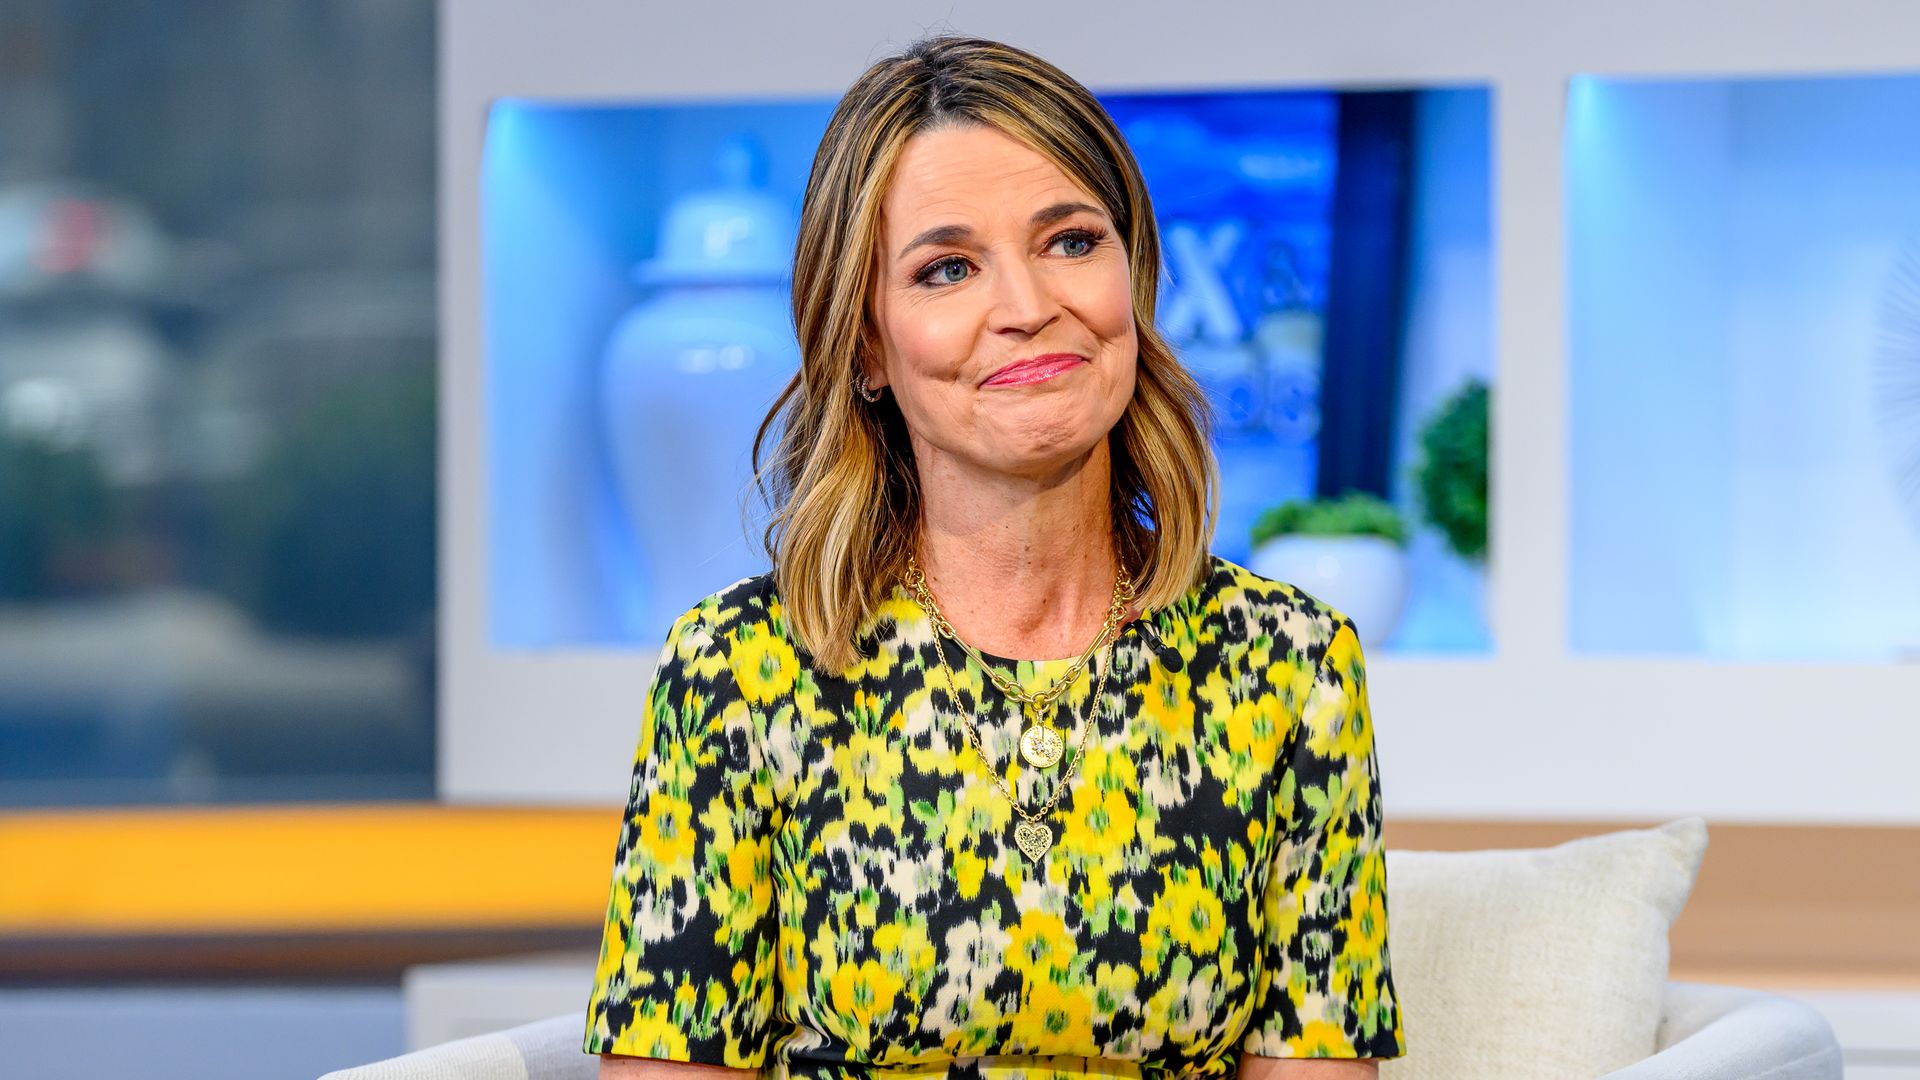 Savannah Guthrie visits "Fox & Friends" to discuss her new book "Mostly What God Does: Reflections on Seeking and Finding His Love Everywhere" at Fox News Channel Studios on February 27, 2024 